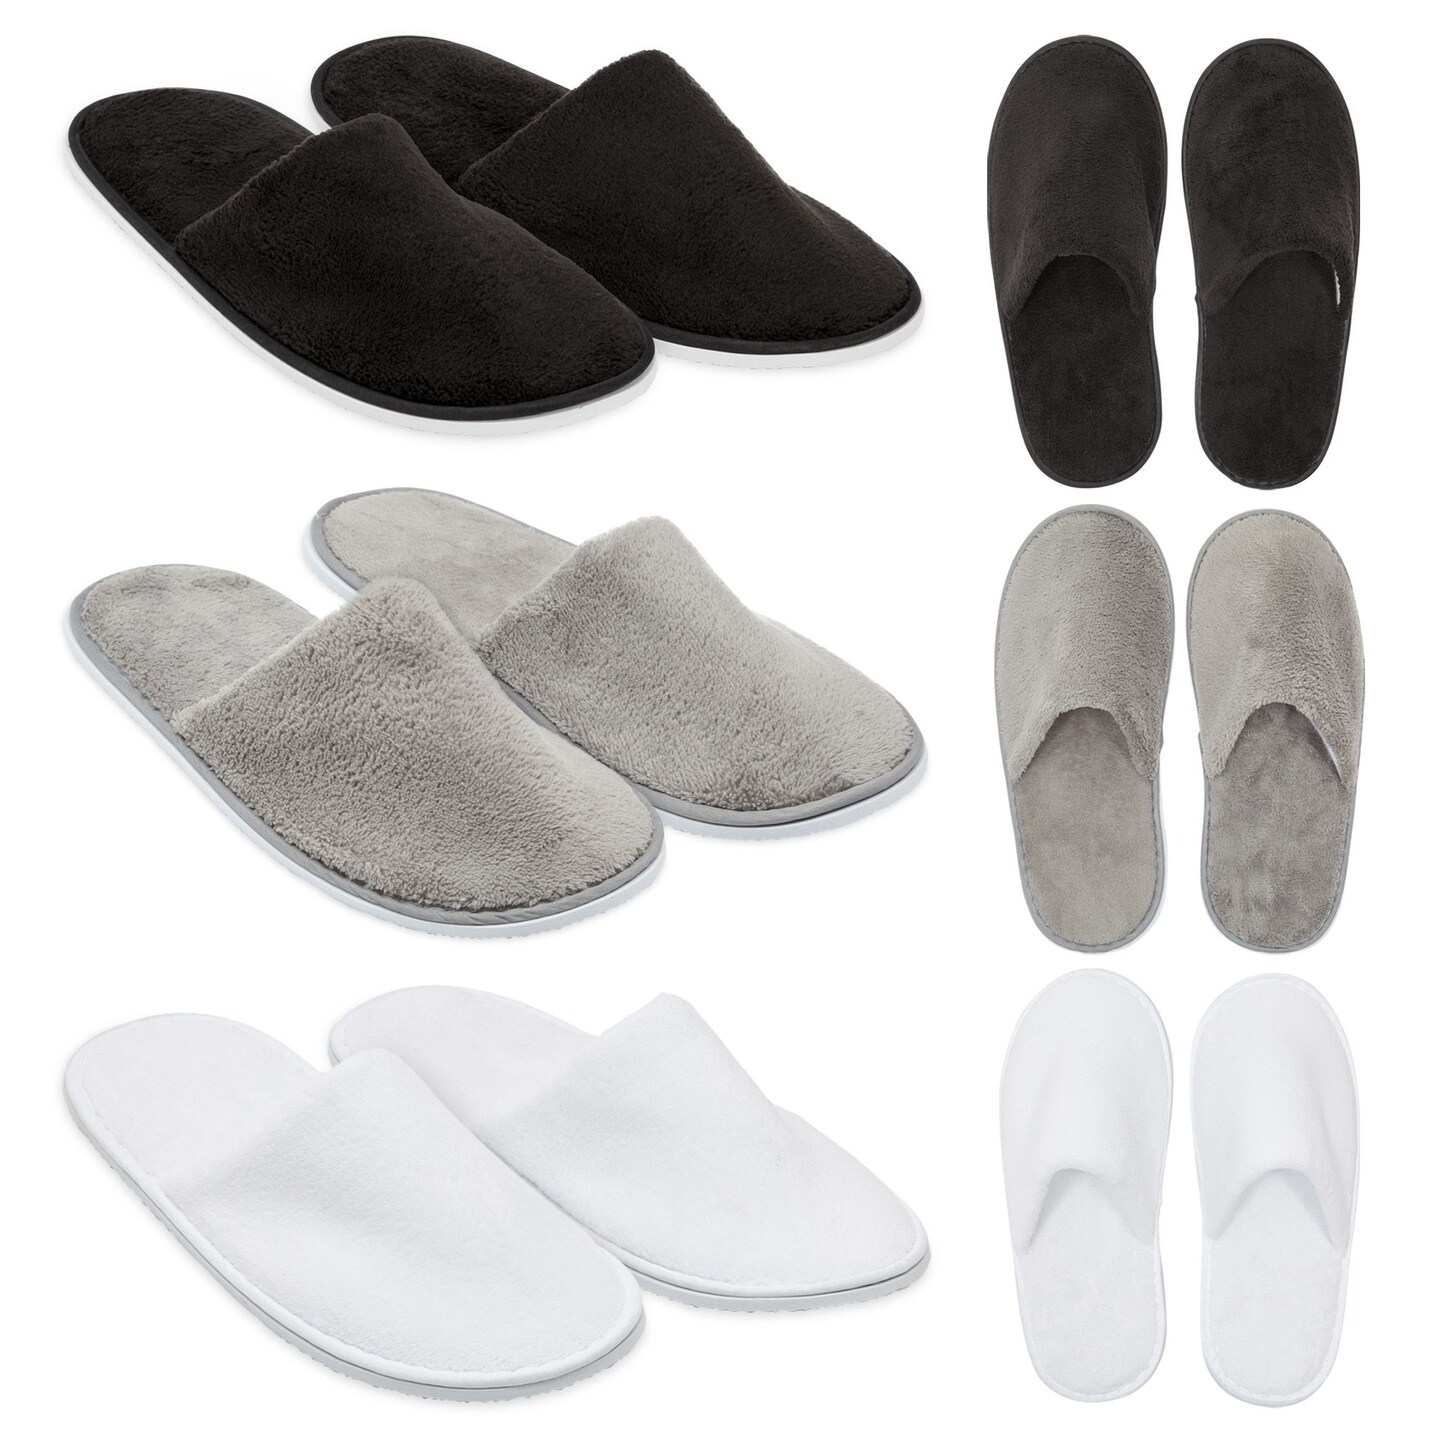 Disposable Closed Toe Slippers for Guests, Women US Size 12 , Men Size 11 (3 Colors, 12 Pairs)